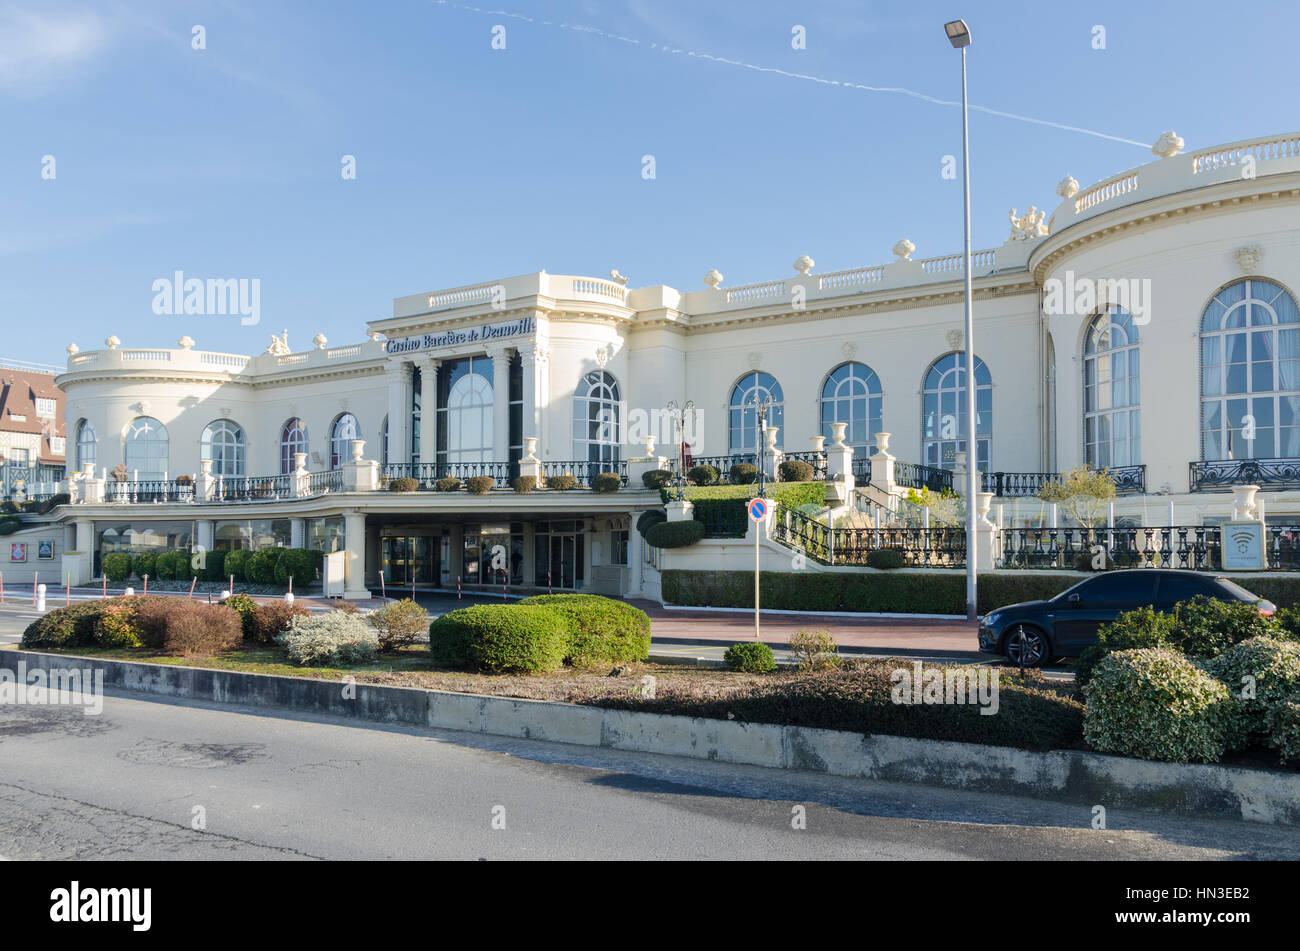 The Casino Barriere de Deauville in the smart Normandy town Stock Photo